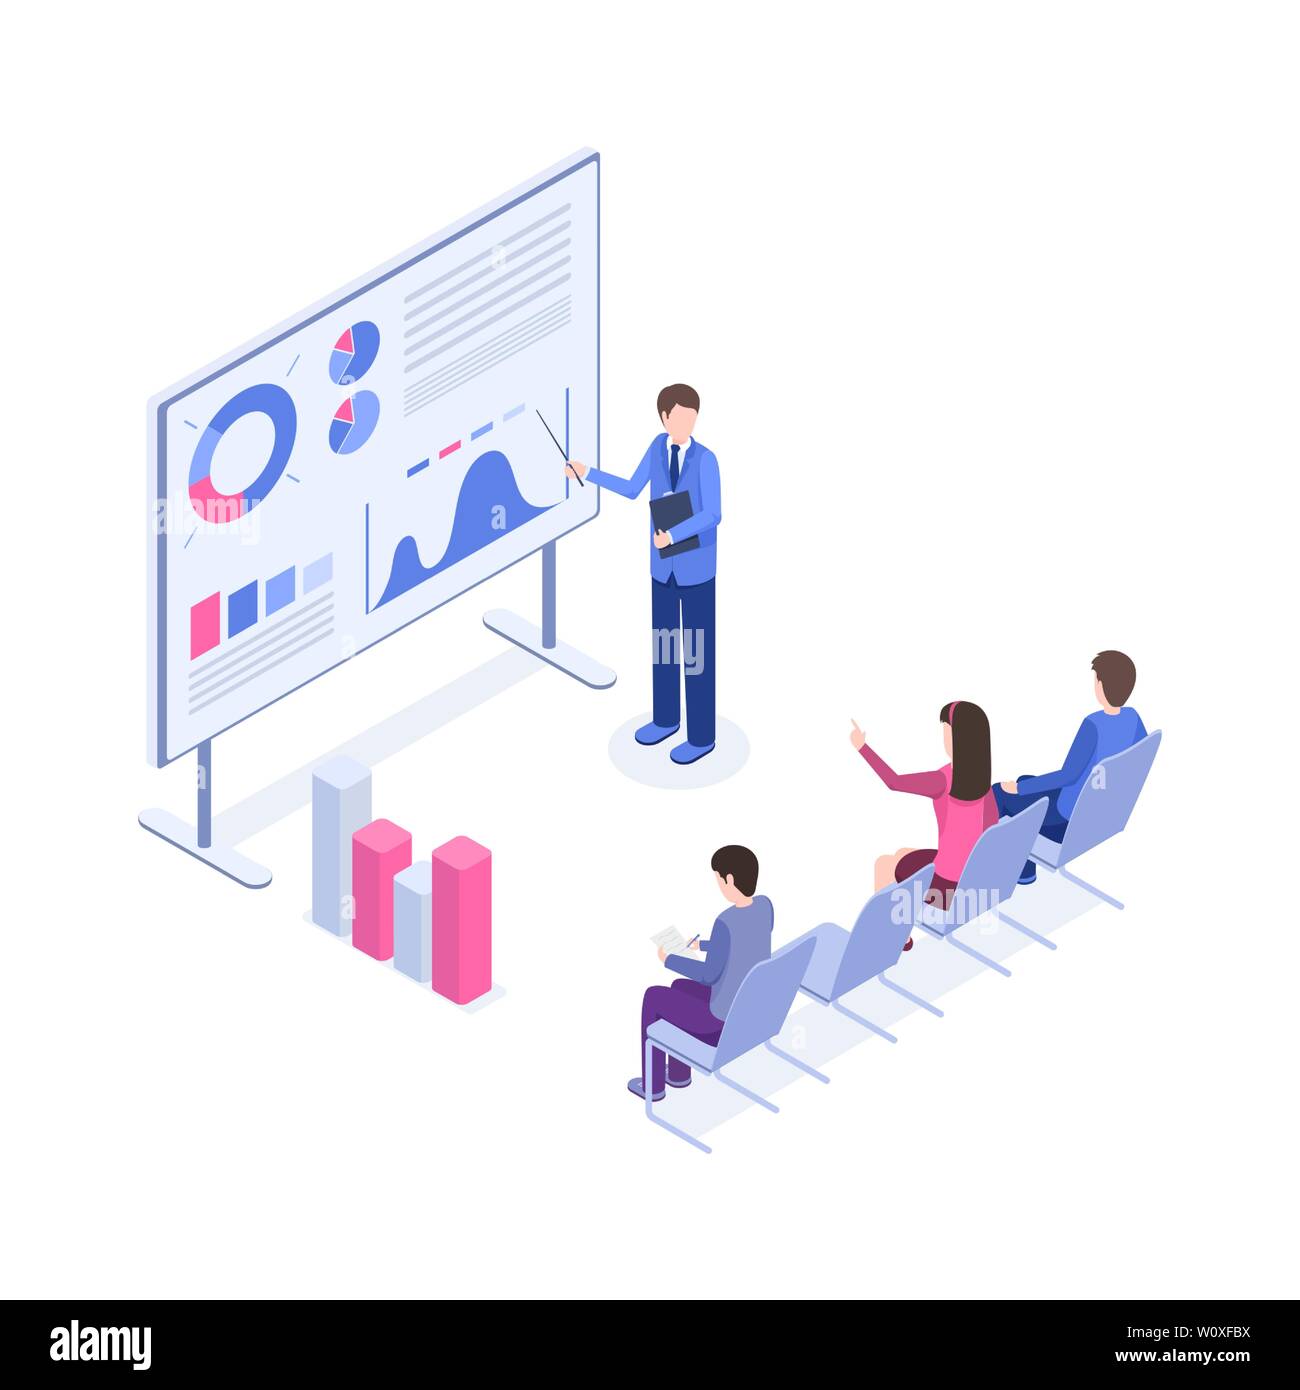 Business presentation vector isometric illustration. Market analyst, boss, office workers 3d cartoon characters. Corporate training, sales pitch, employer explaining charts and diagrams on board Stock Vector